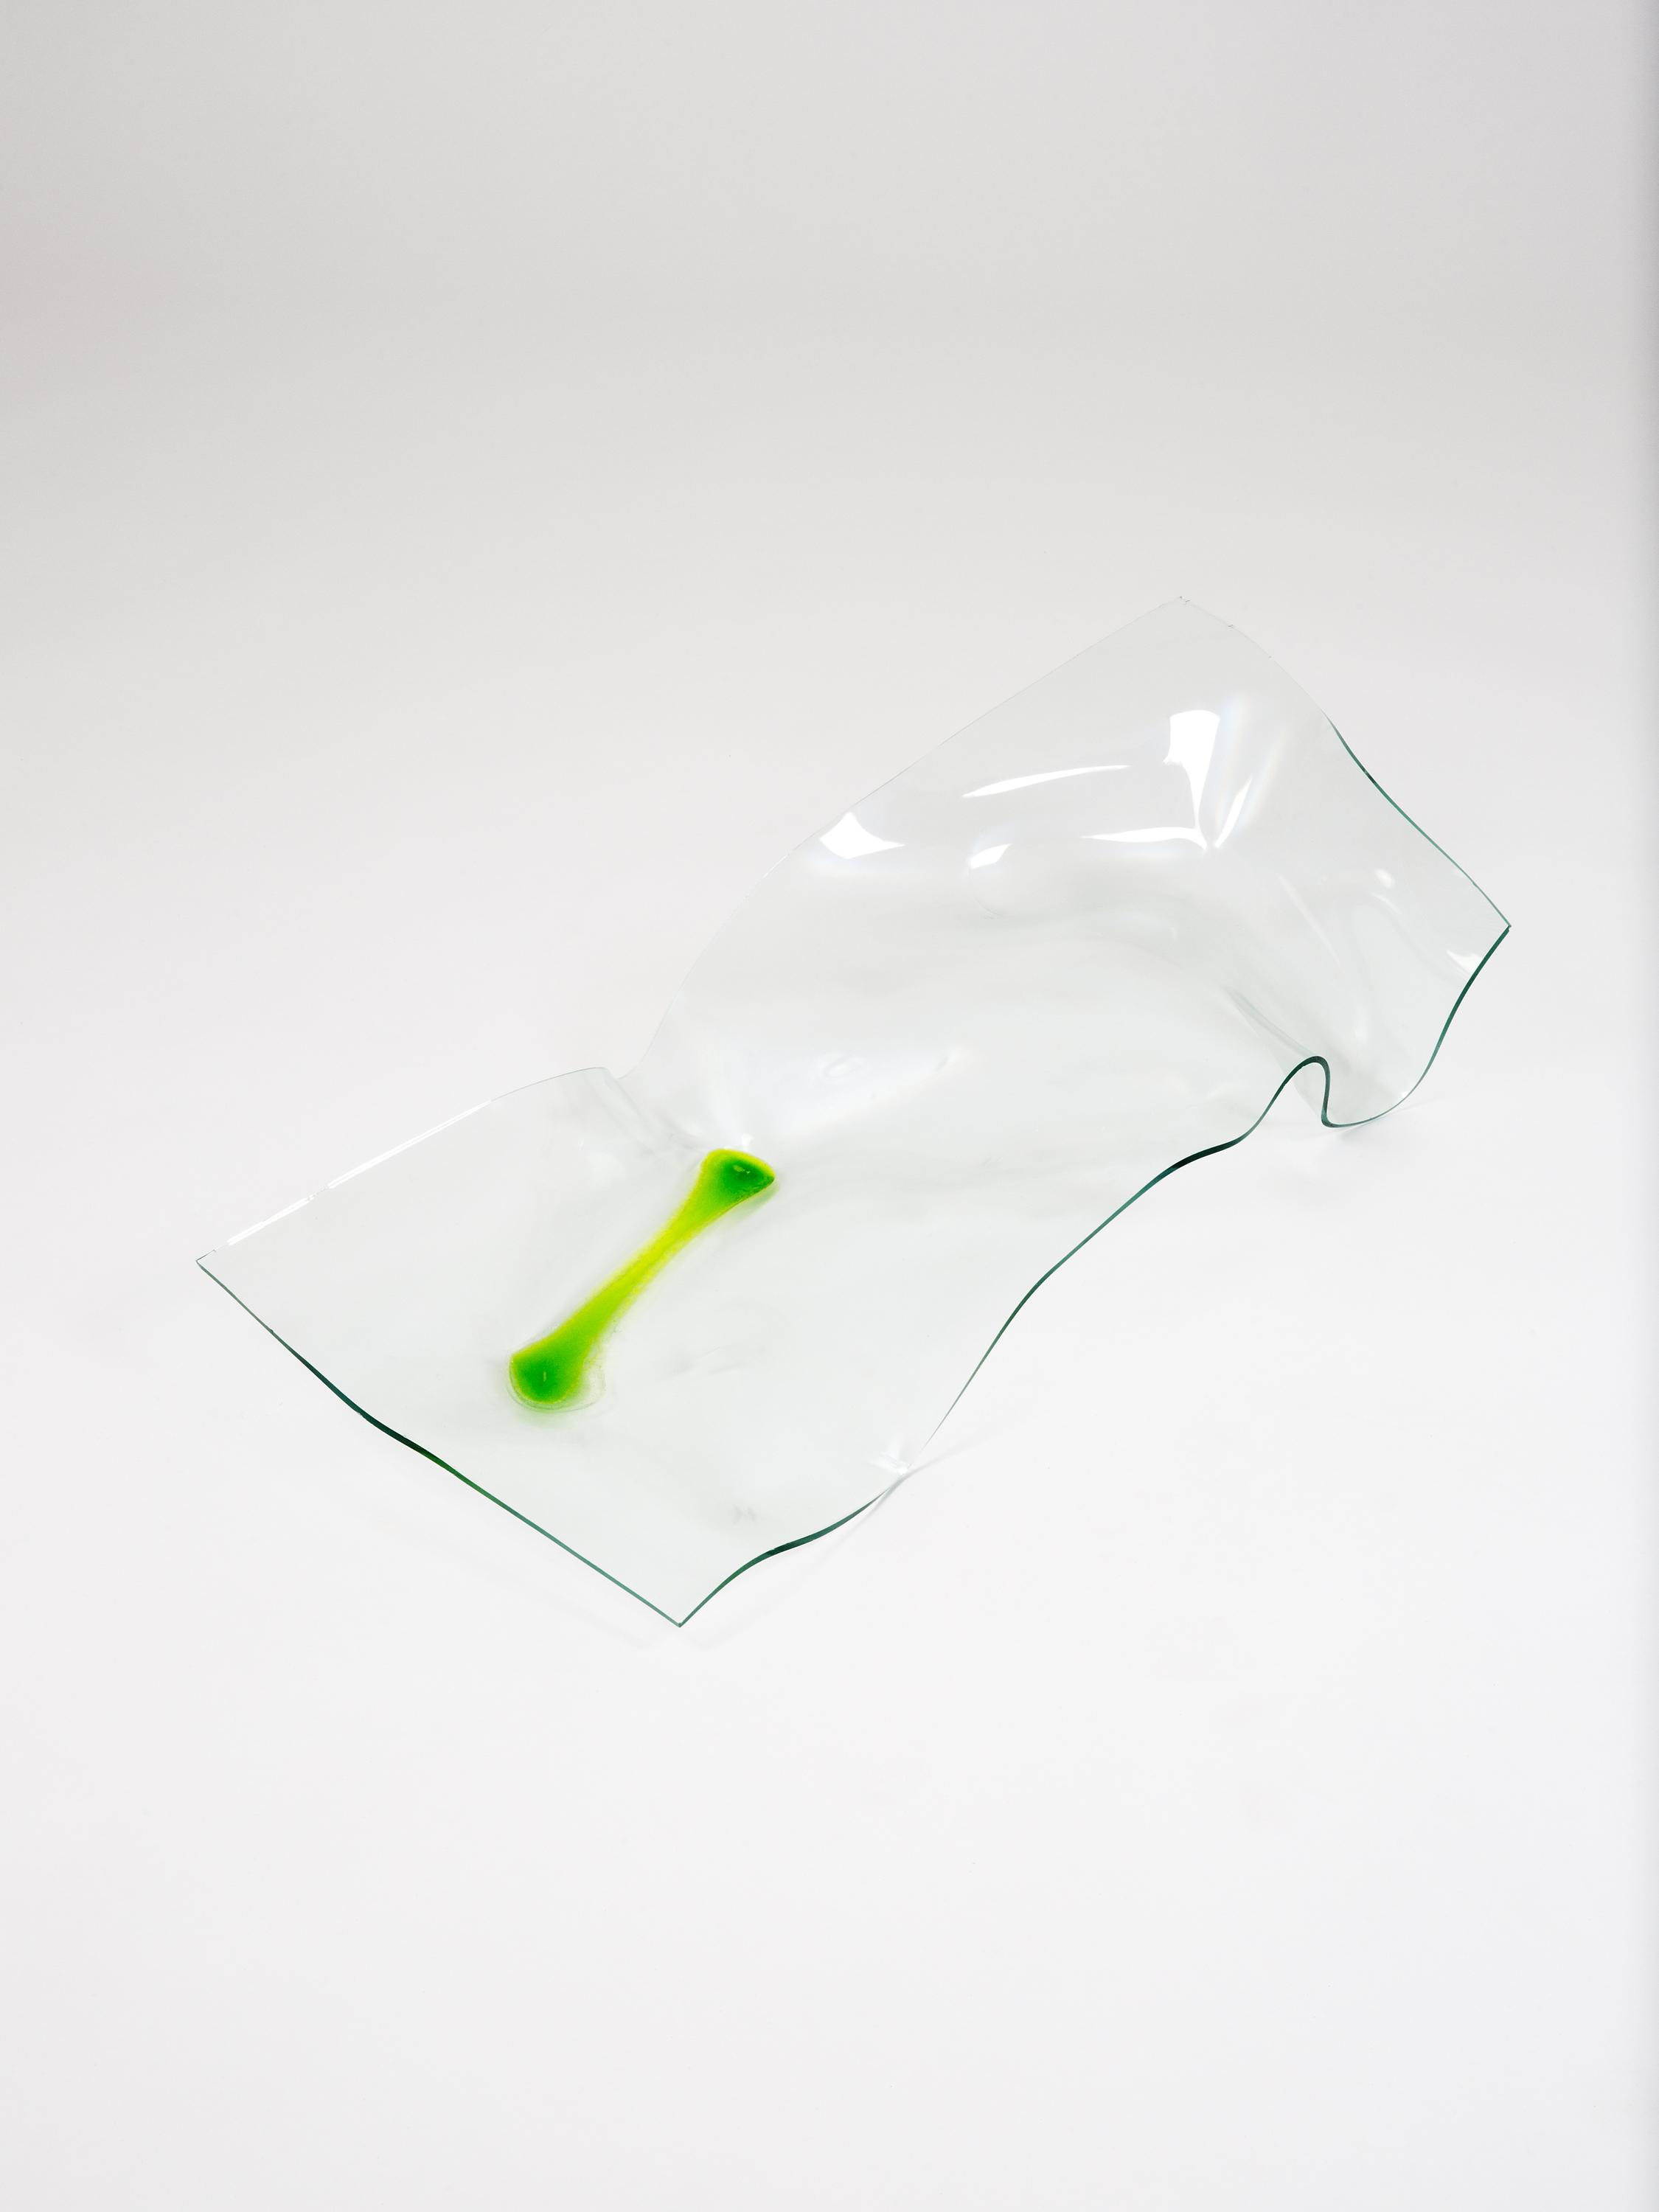 An image of an undulating sheet of clear glass, seemingly melted into this shape, on top of which is pooled a strip of bright green liquid.